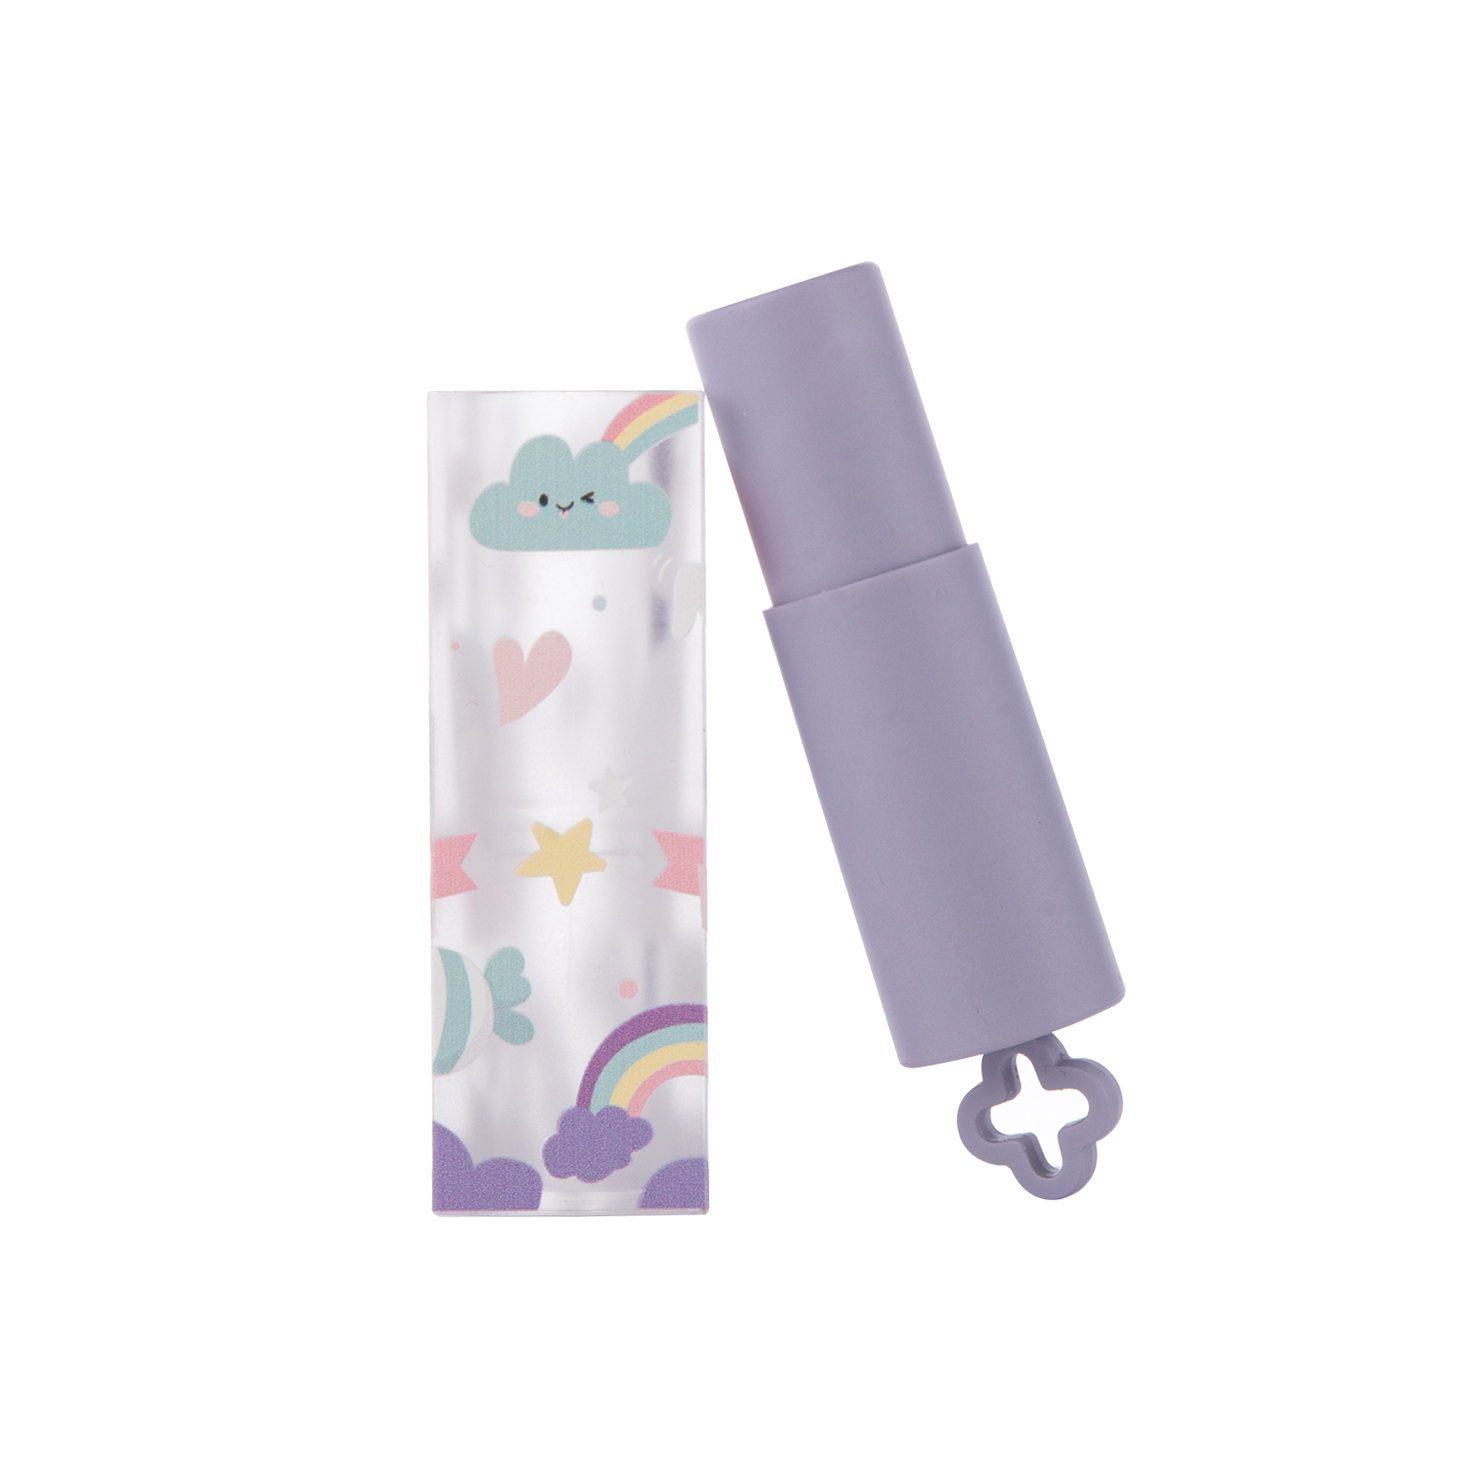 3.5g Purple empty lipstick tubes lip balm container cosmetic personal care tubes